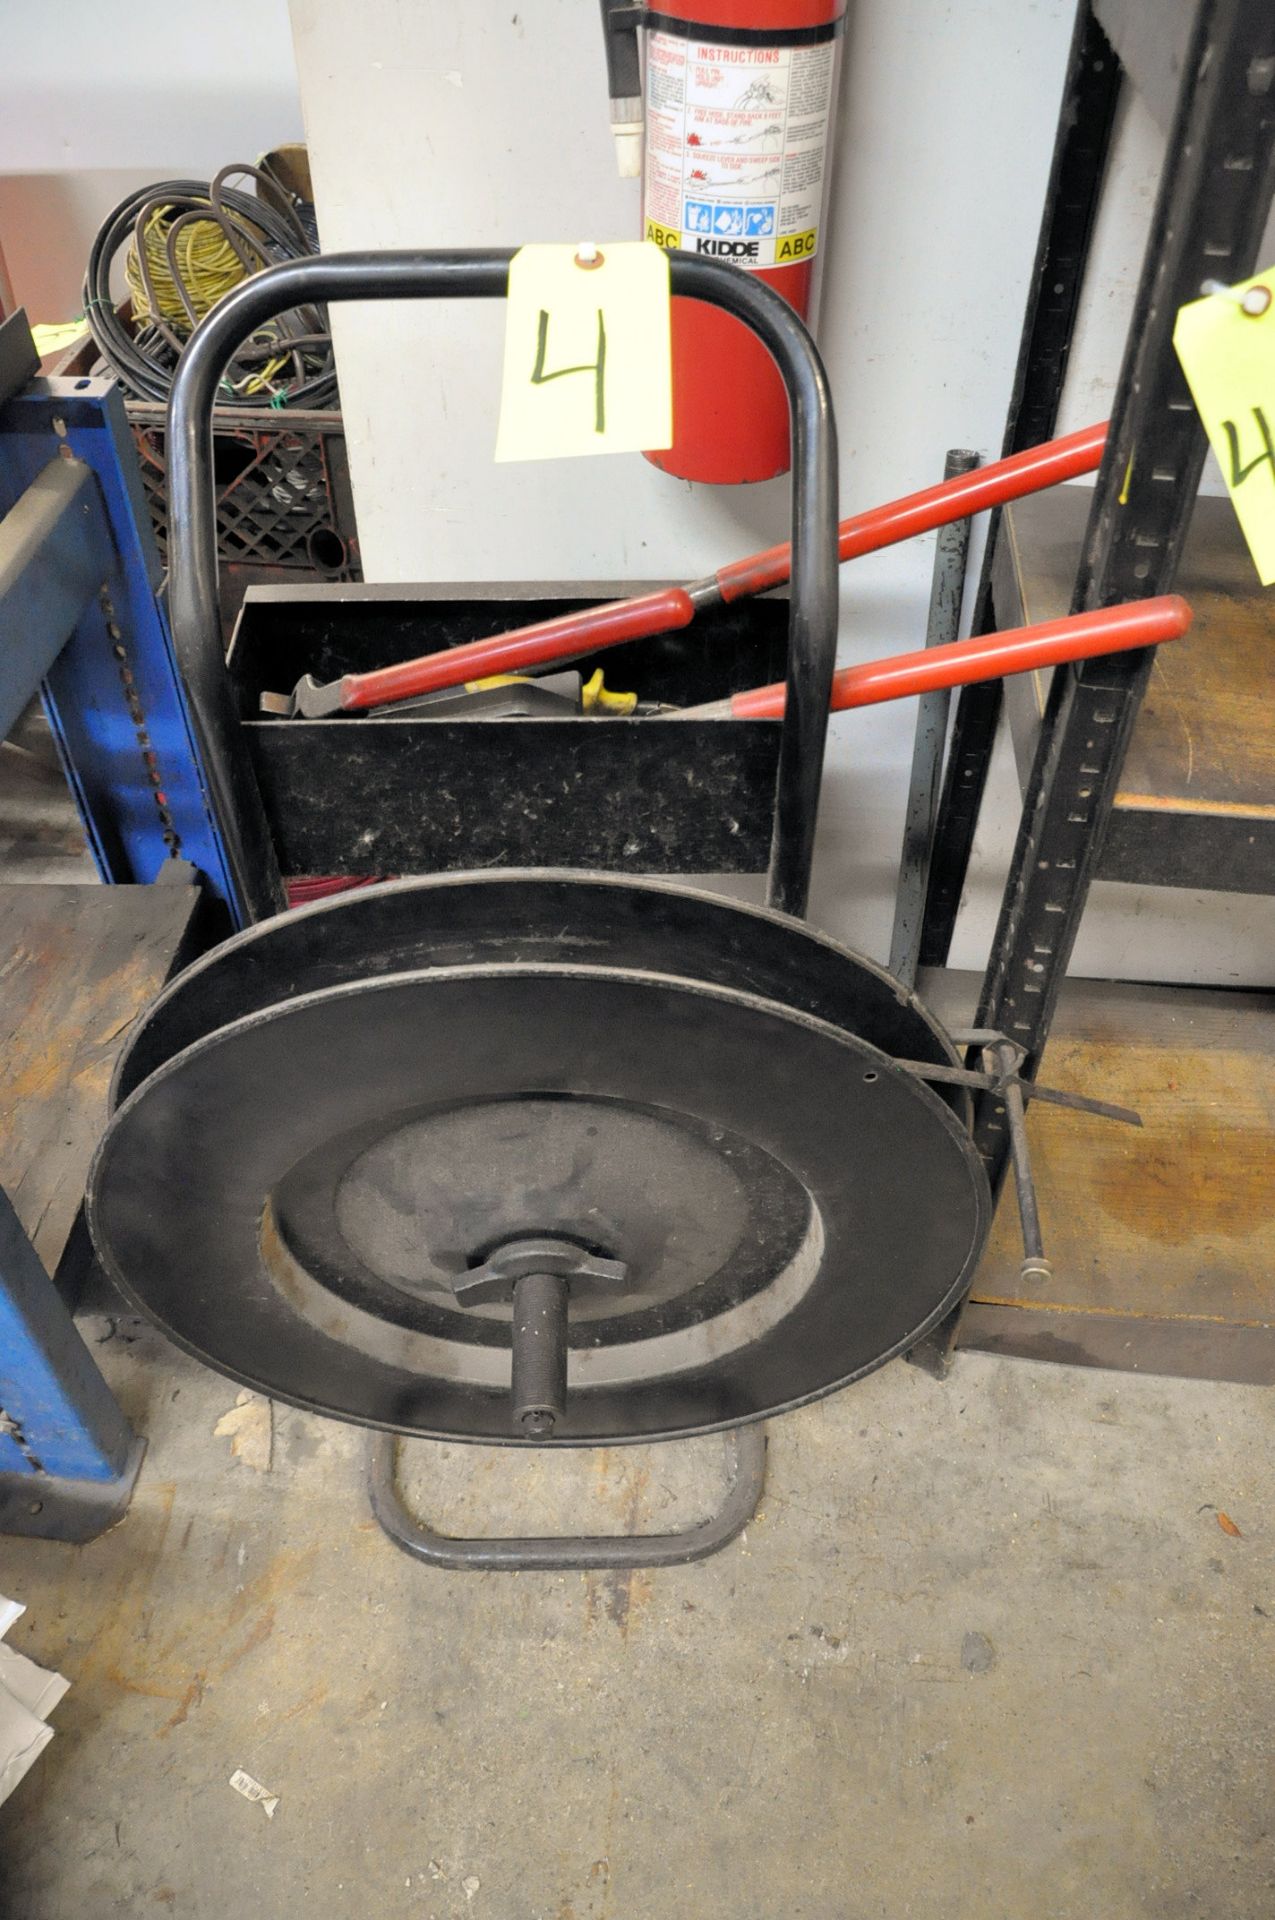 Steel Banding Cart with 1/2" Banding, Tools, and Clips